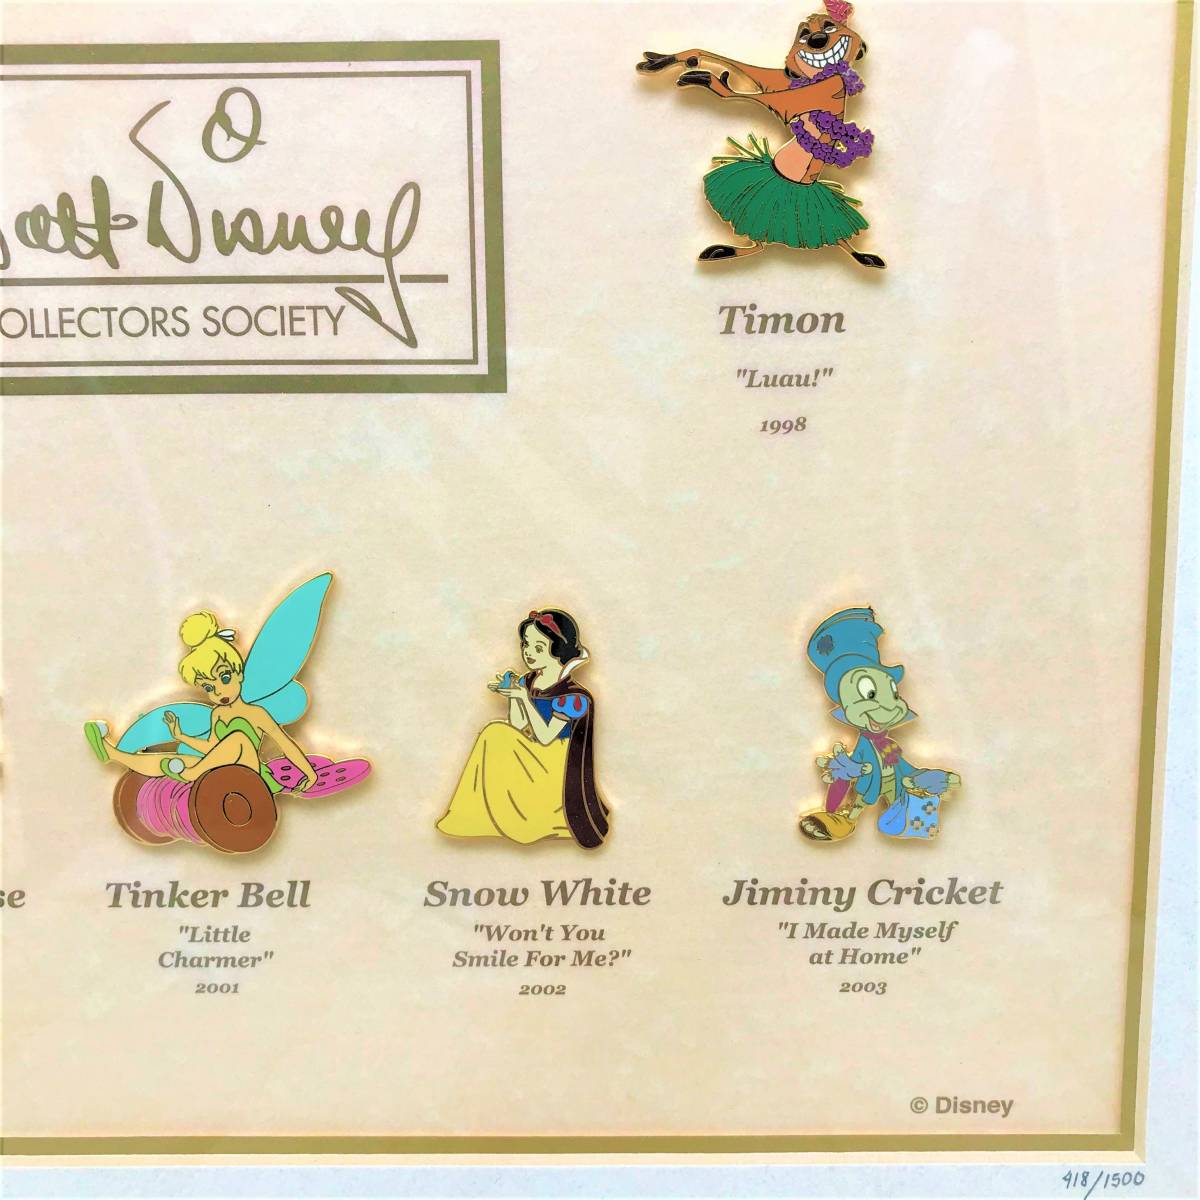  limited goods *WDCC che car cat Tinkerbell Mickey Pooh Dumbo Snow White ji minnie kli Kett * pin bachi pin badge *. picture picture frame 